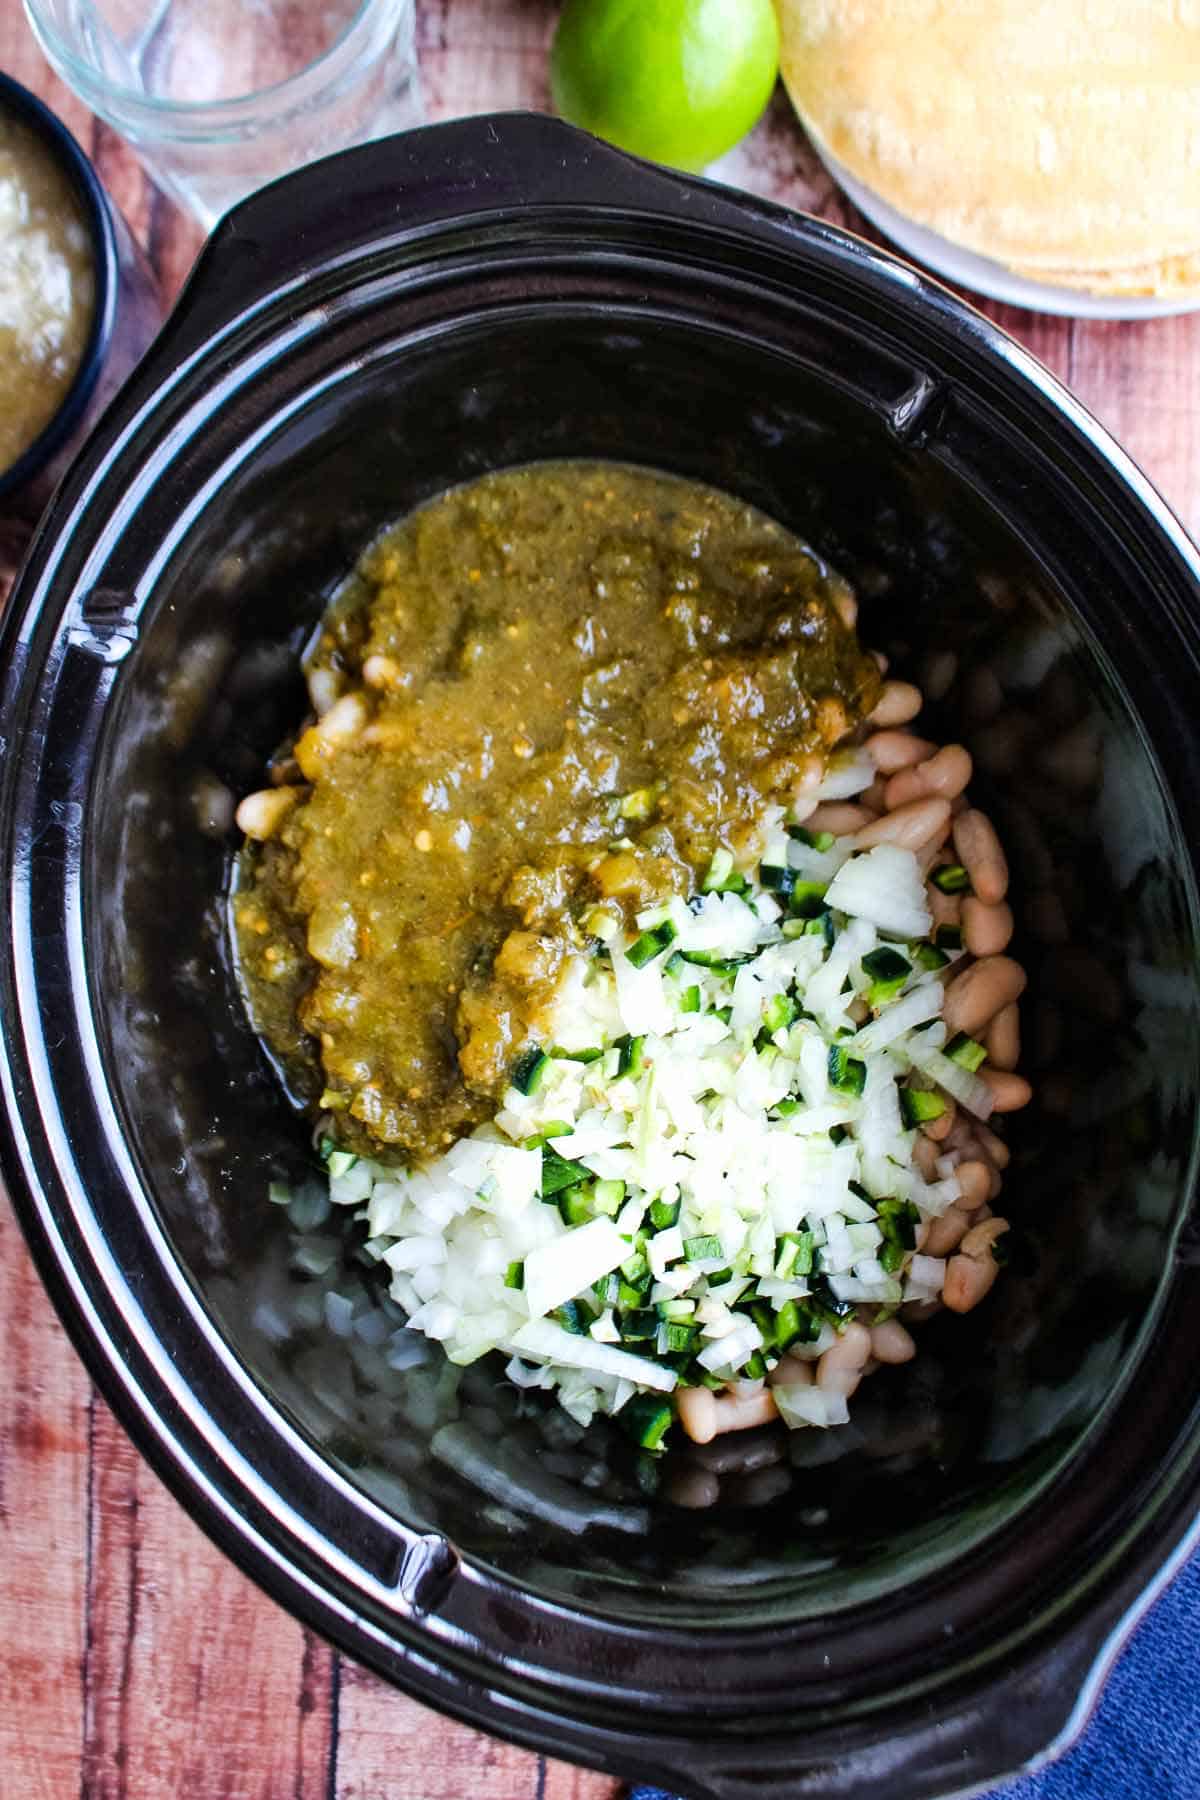 Onions, garlic and jalapenos along with the salsa verde added to the slow cooker on top of the beans and chicken.